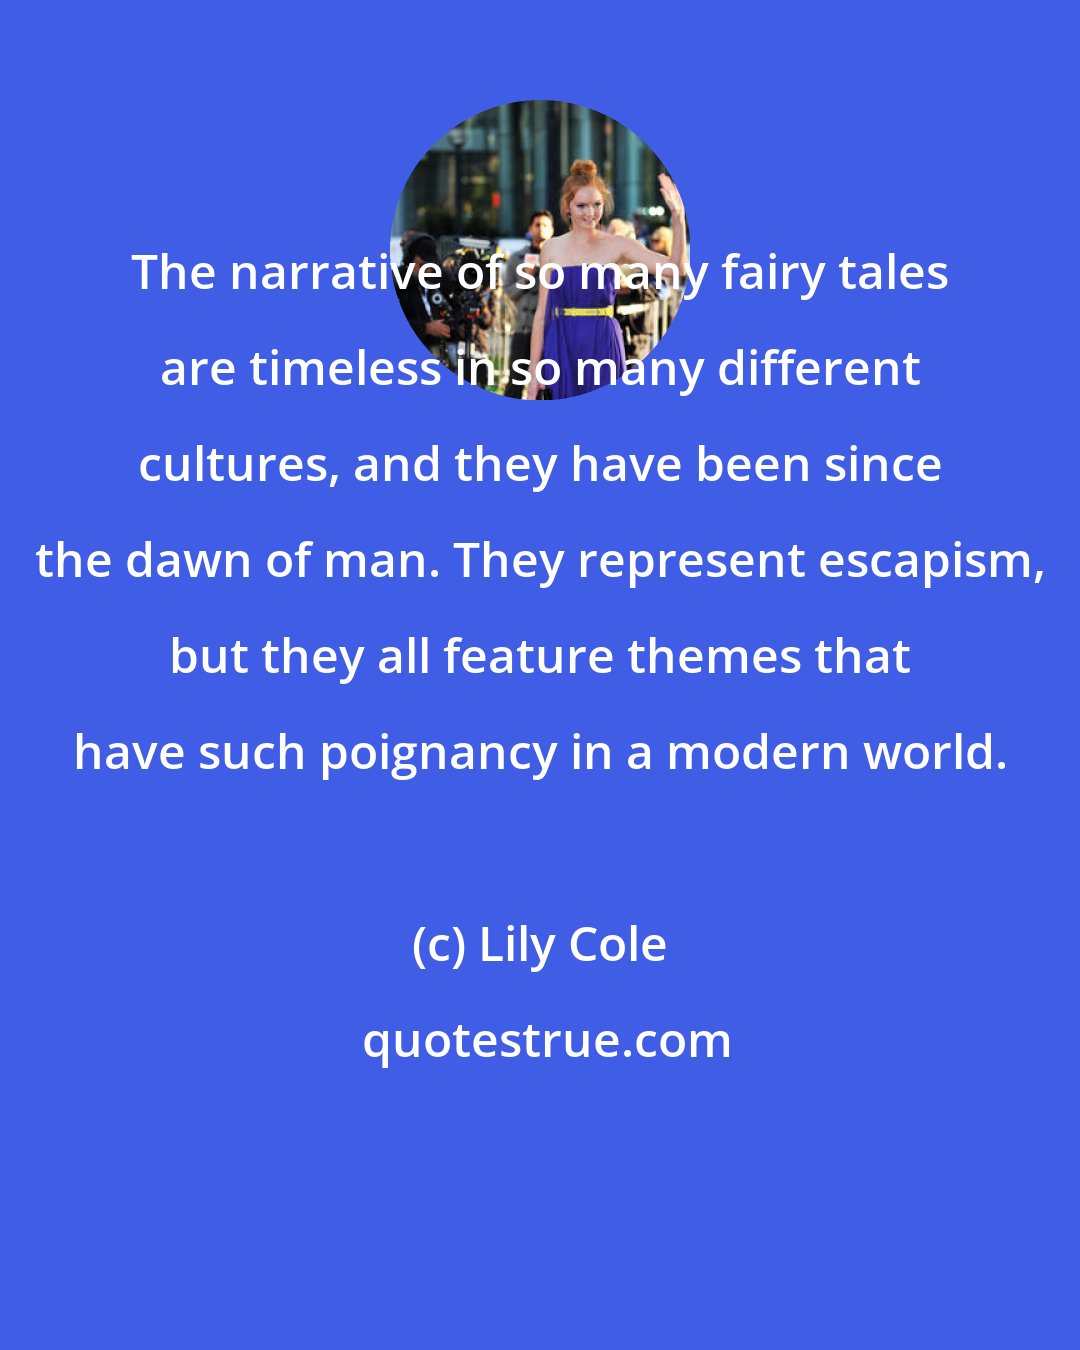 Lily Cole: The narrative of so many fairy tales are timeless in so many different cultures, and they have been since the dawn of man. They represent escapism, but they all feature themes that have such poignancy in a modern world.